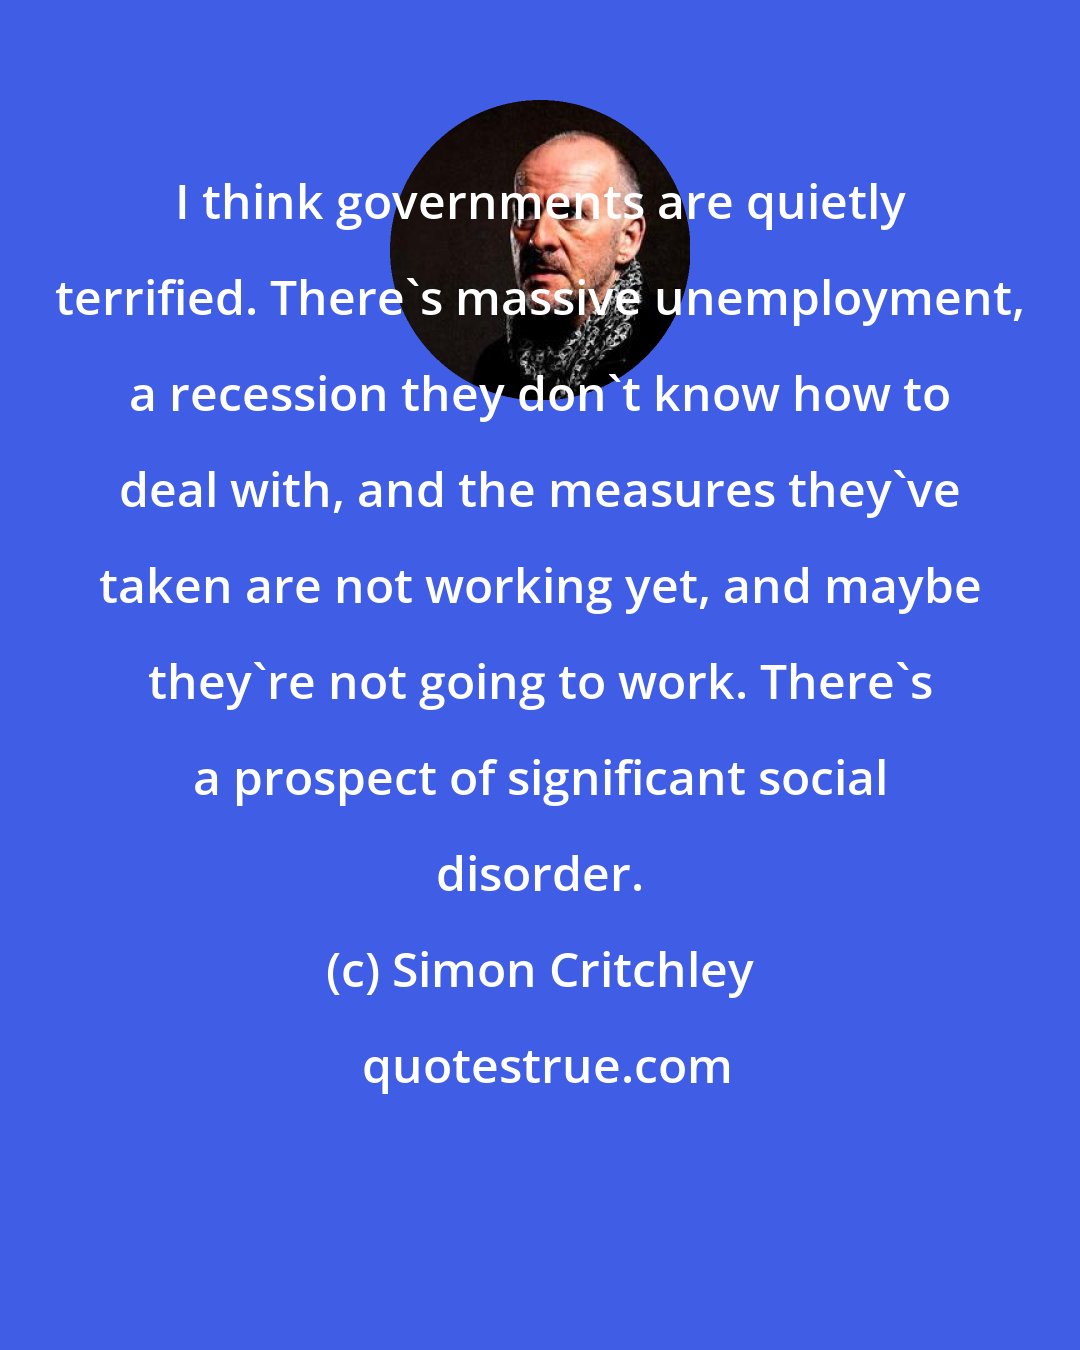 Simon Critchley: I think governments are quietly terrified. There's massive unemployment, a recession they don't know how to deal with, and the measures they've taken are not working yet, and maybe they're not going to work. There's a prospect of significant social disorder.